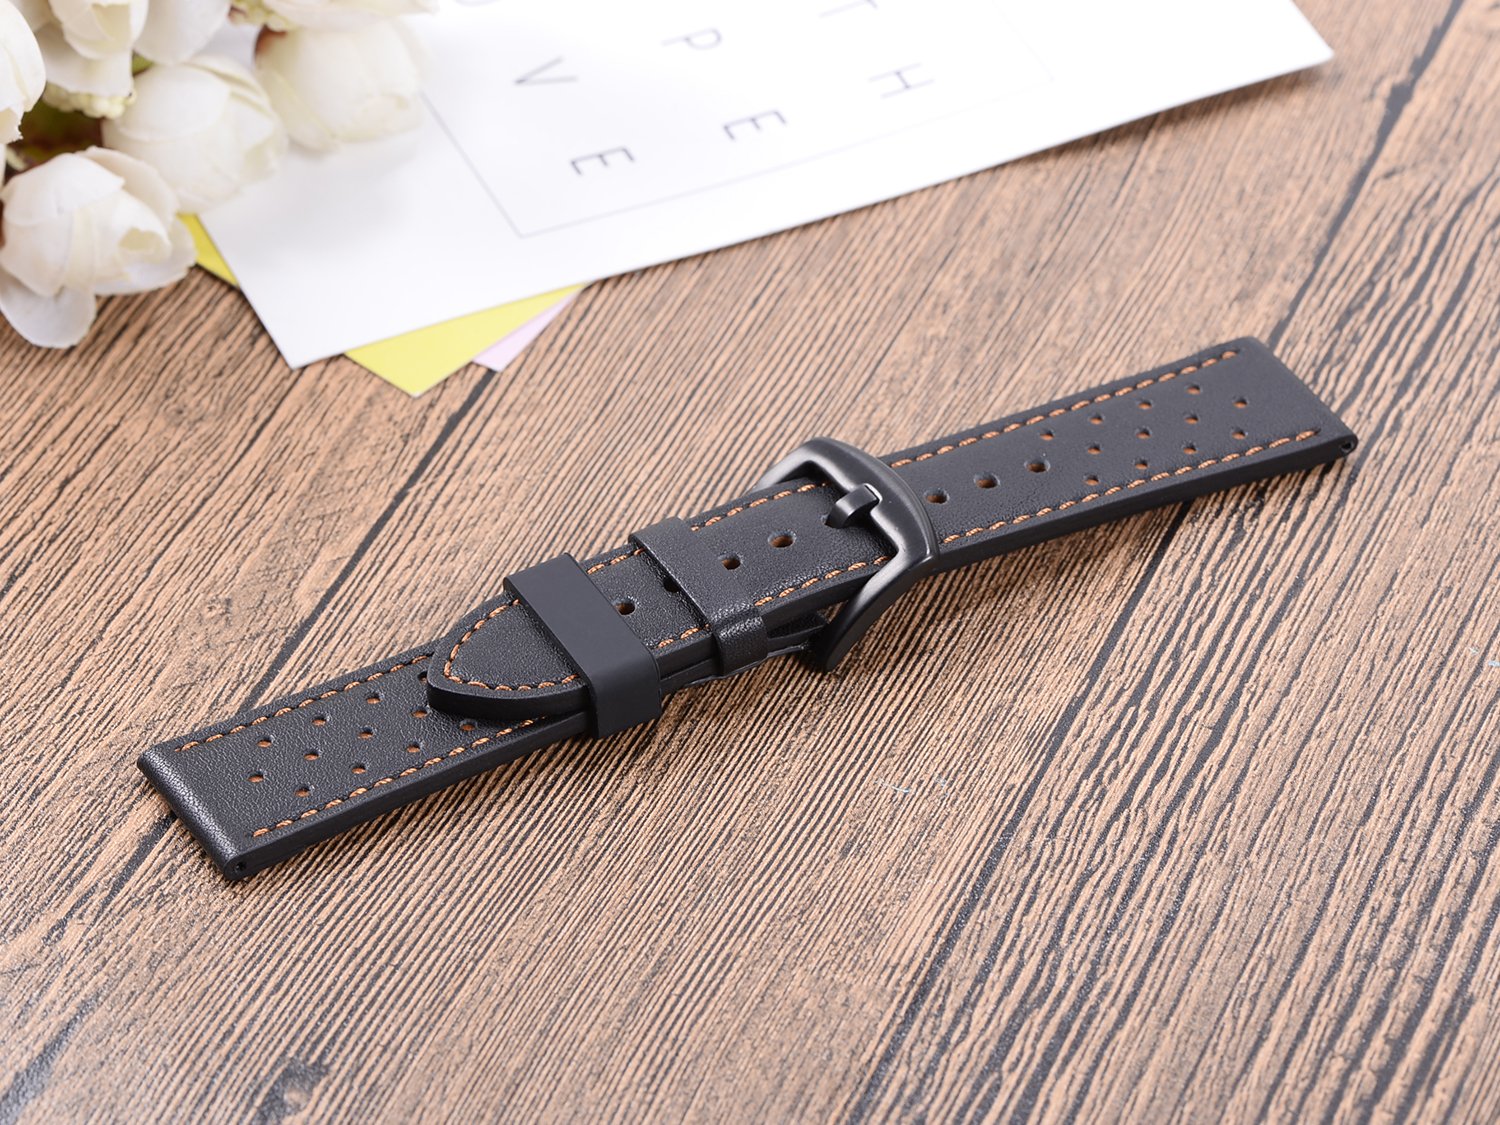 Adebena 6Pieces Rubber Watch Band Strap Loops 14mm/16mm/18mm/20mm/22mm/24mm/26mm Black Clear Replacement Resin Holder Retainer with Spring Bar Tools